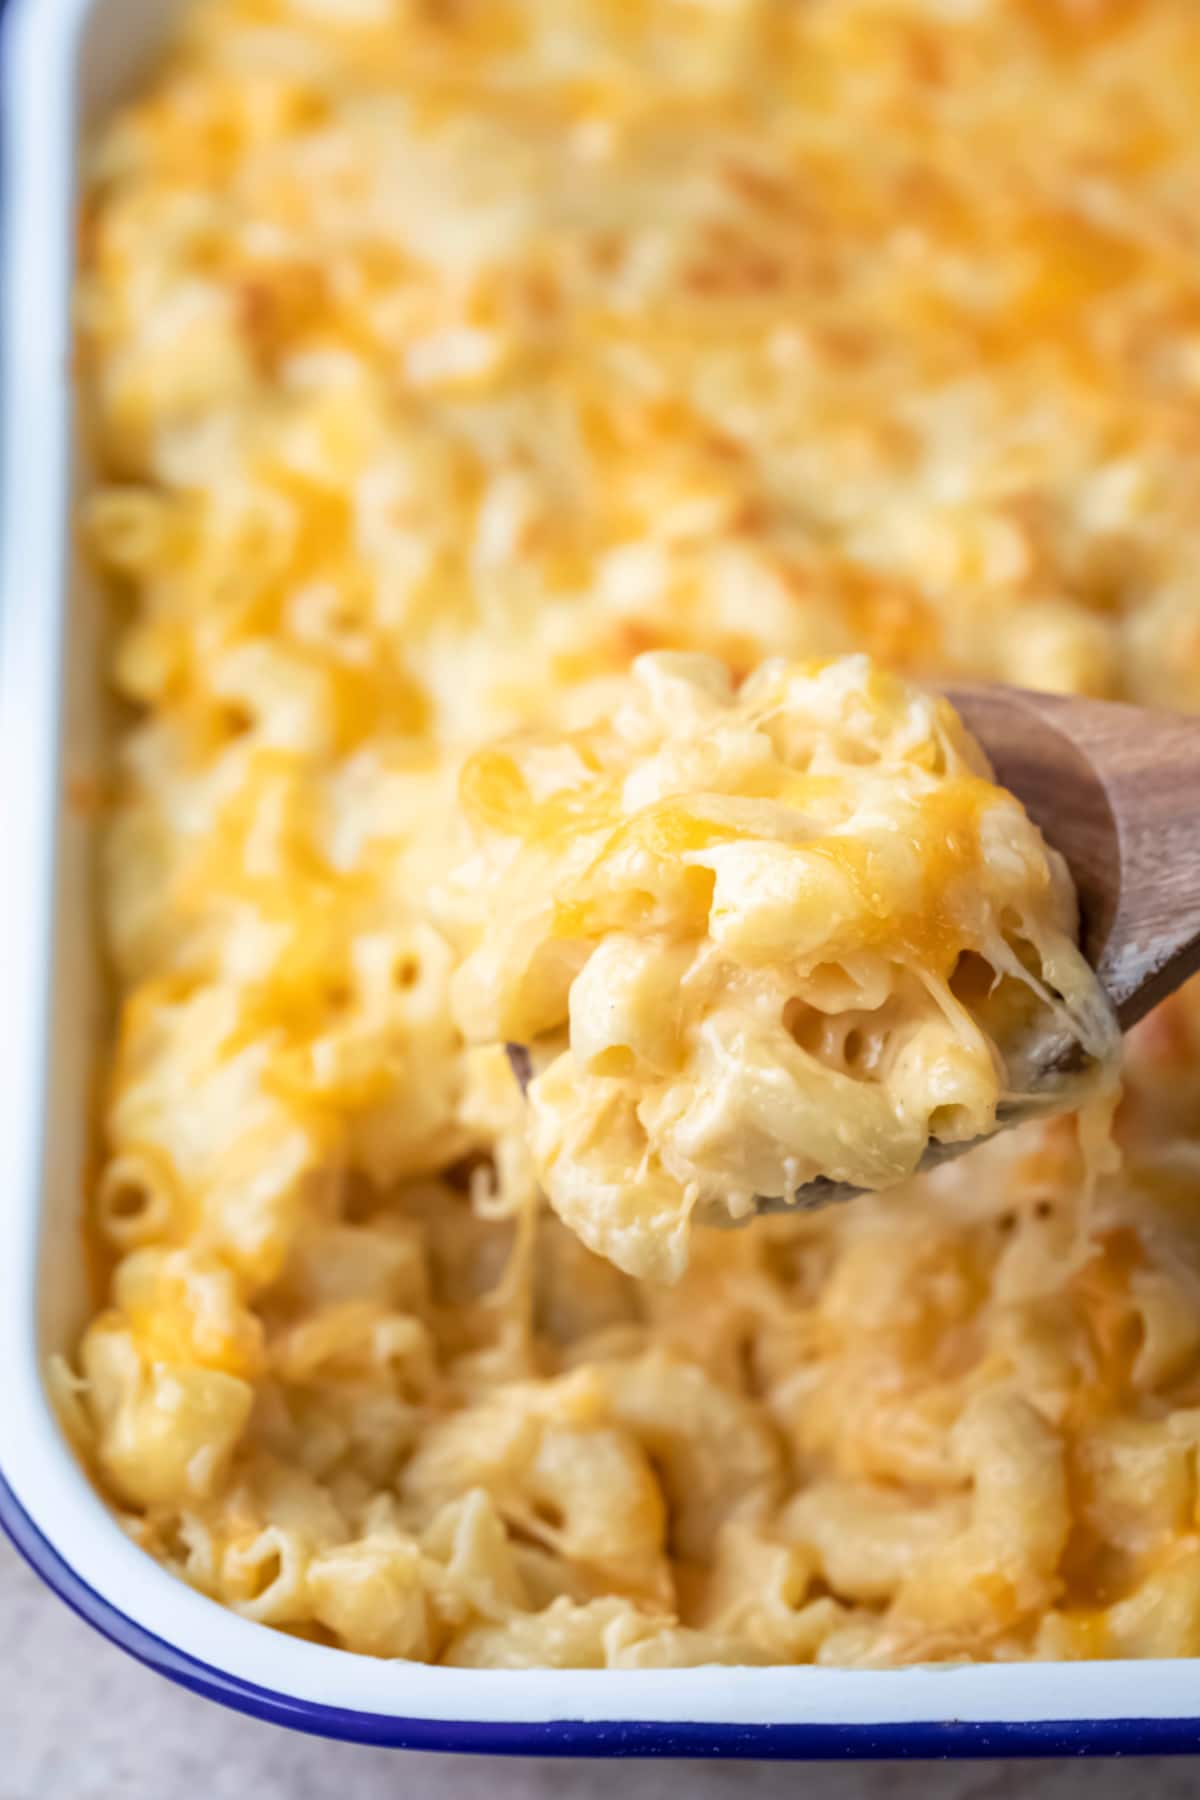 baked-macaroni-and-cheese-i-heart-eating